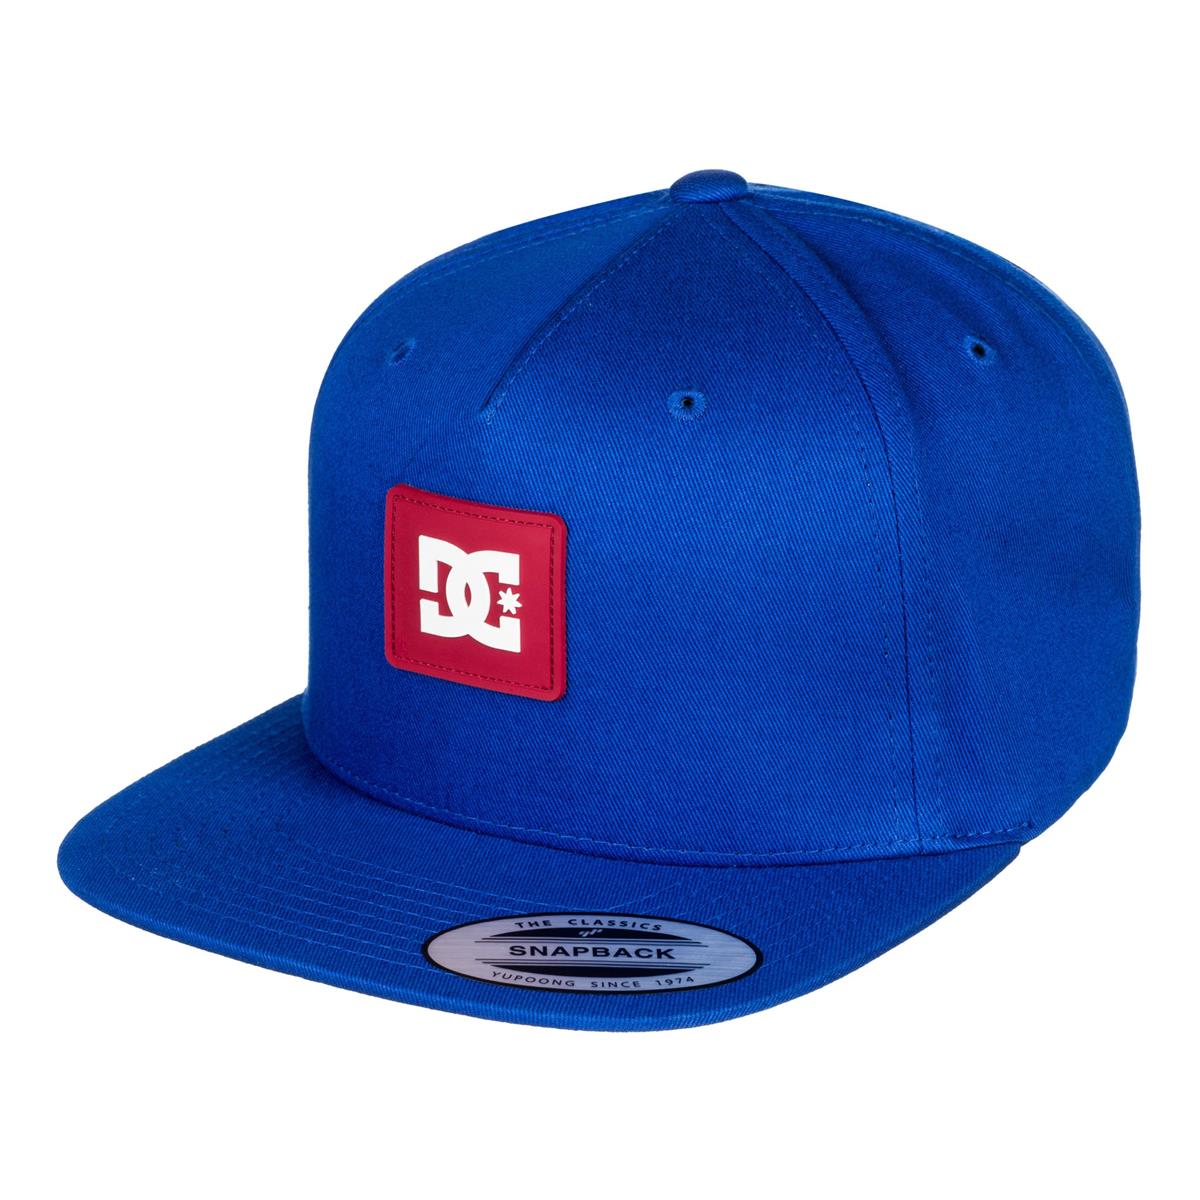 DC Cappellino Snap Back Snapdoodle Sodalite Blue